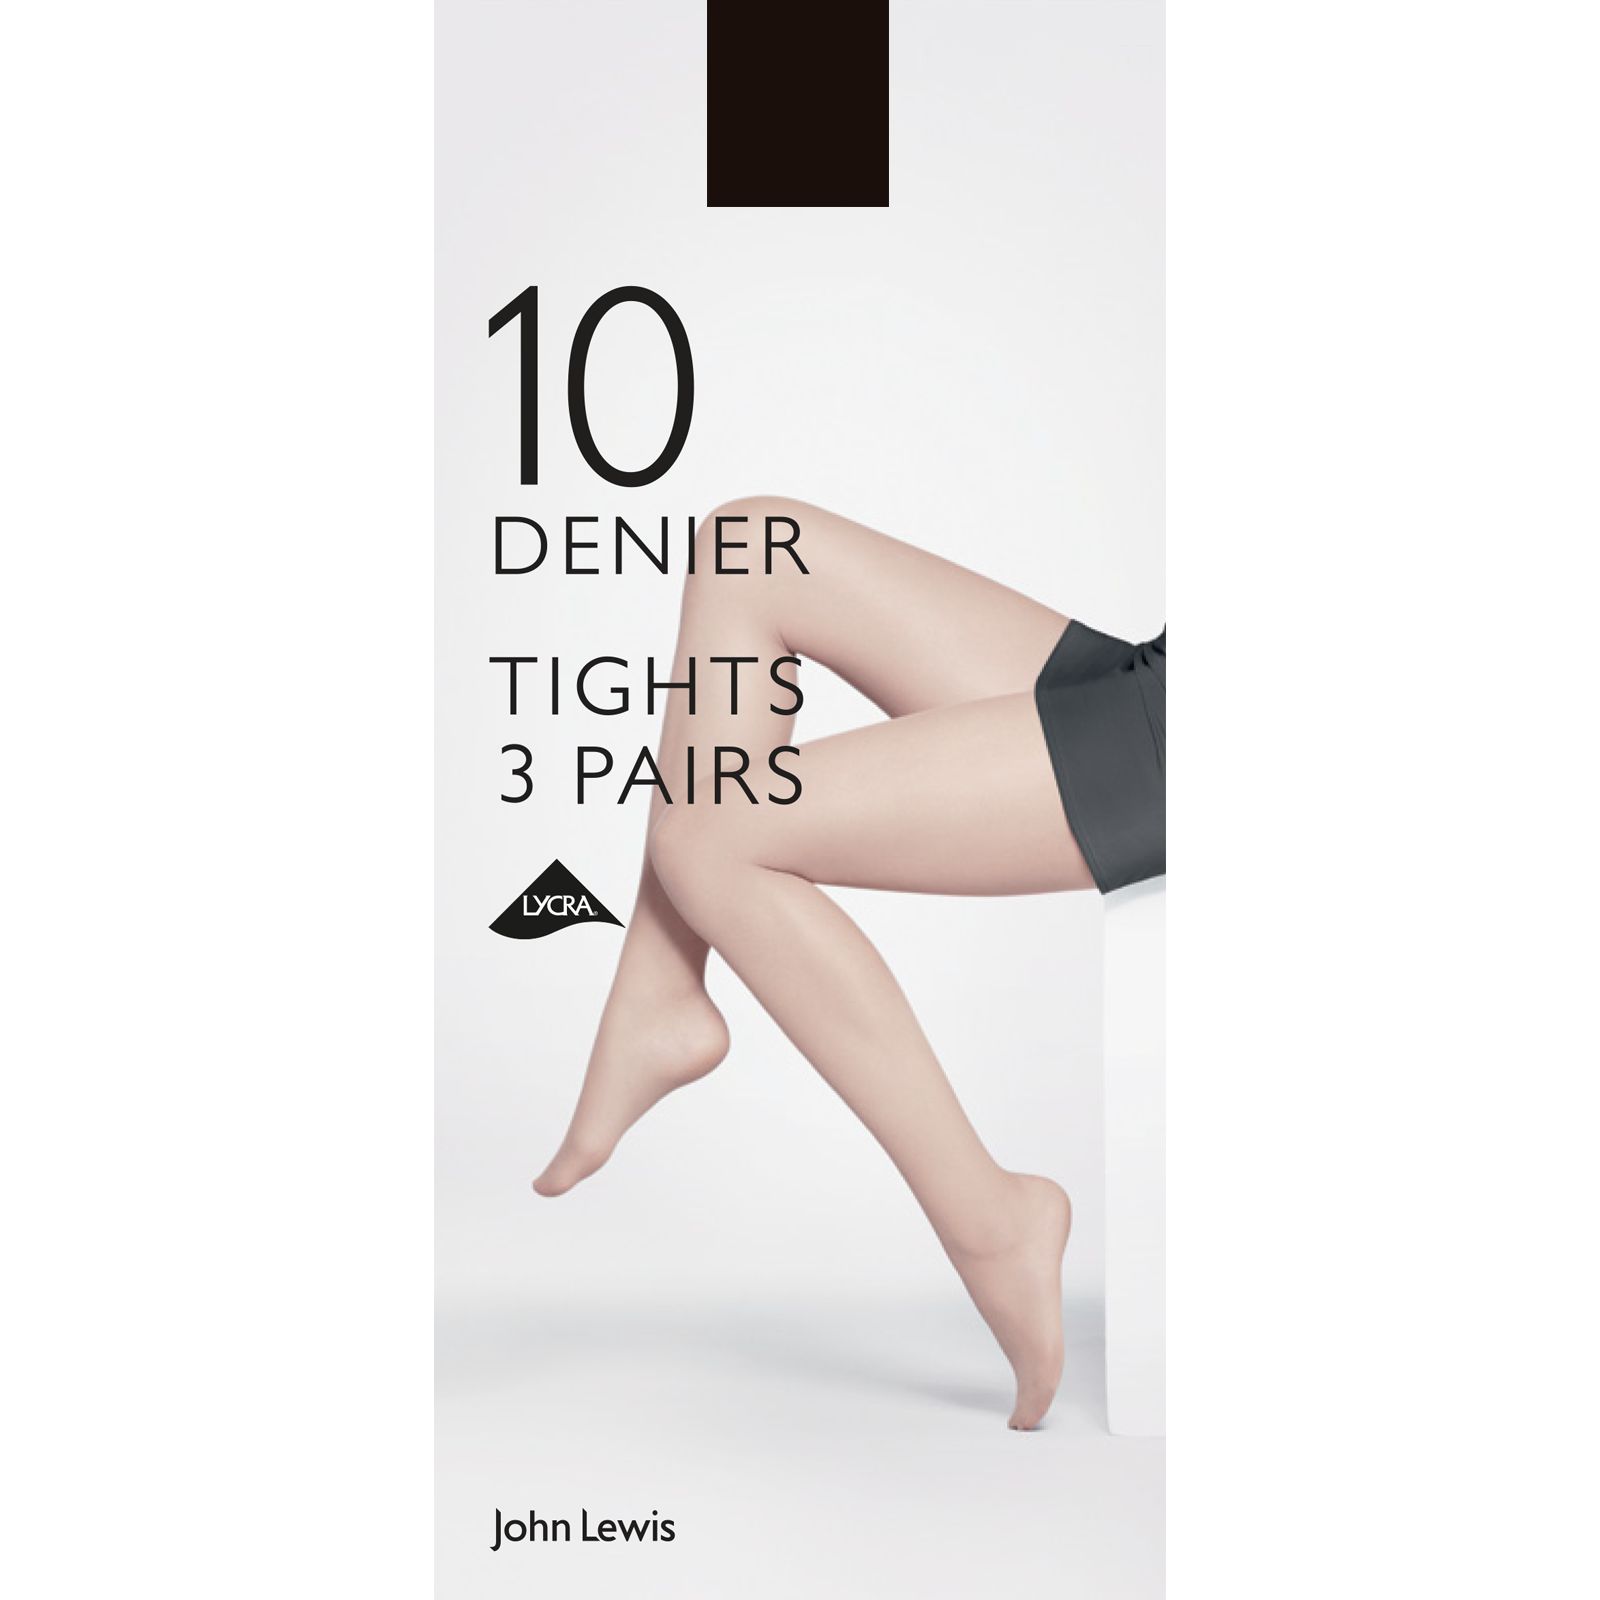 Buy Navy 100 Denier Opaque Tights 3 Pack M, Tights